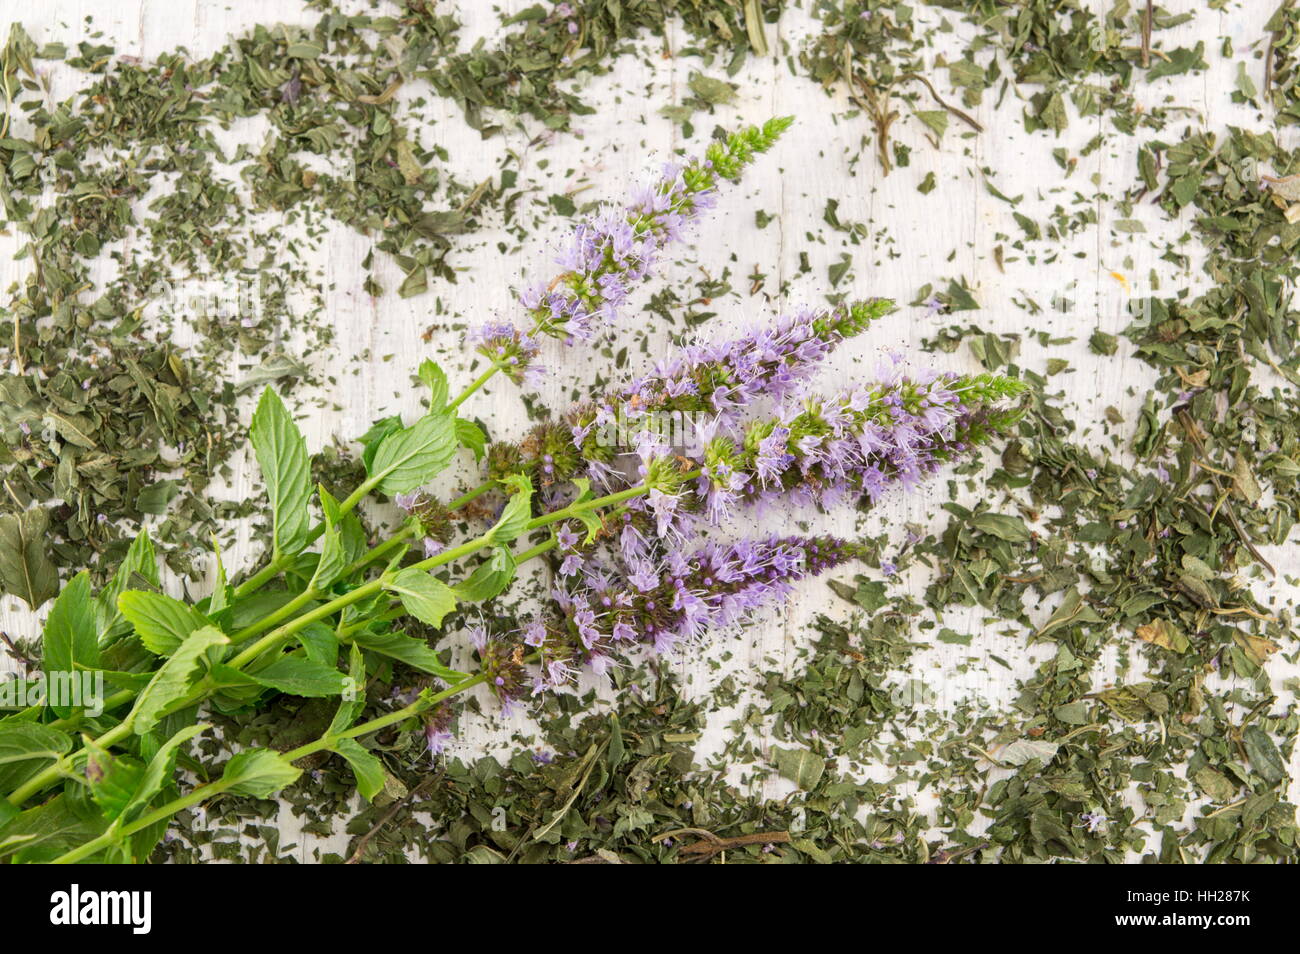 Mint tea herbs with flowers on a wooden table Stock Photo